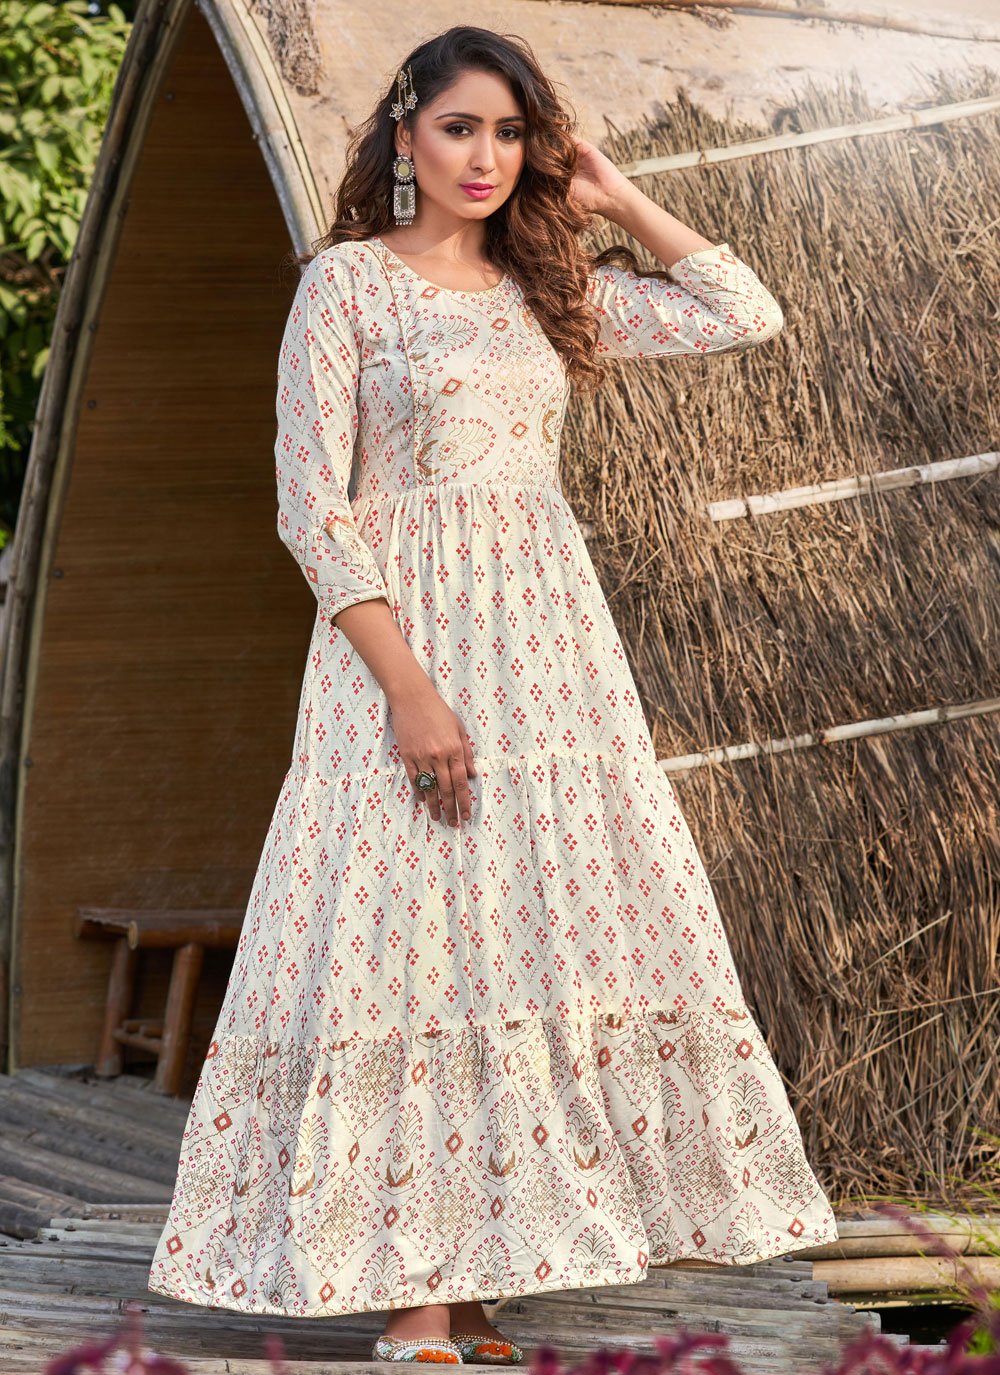 White Rayon Printed Casual Kurti for Festival